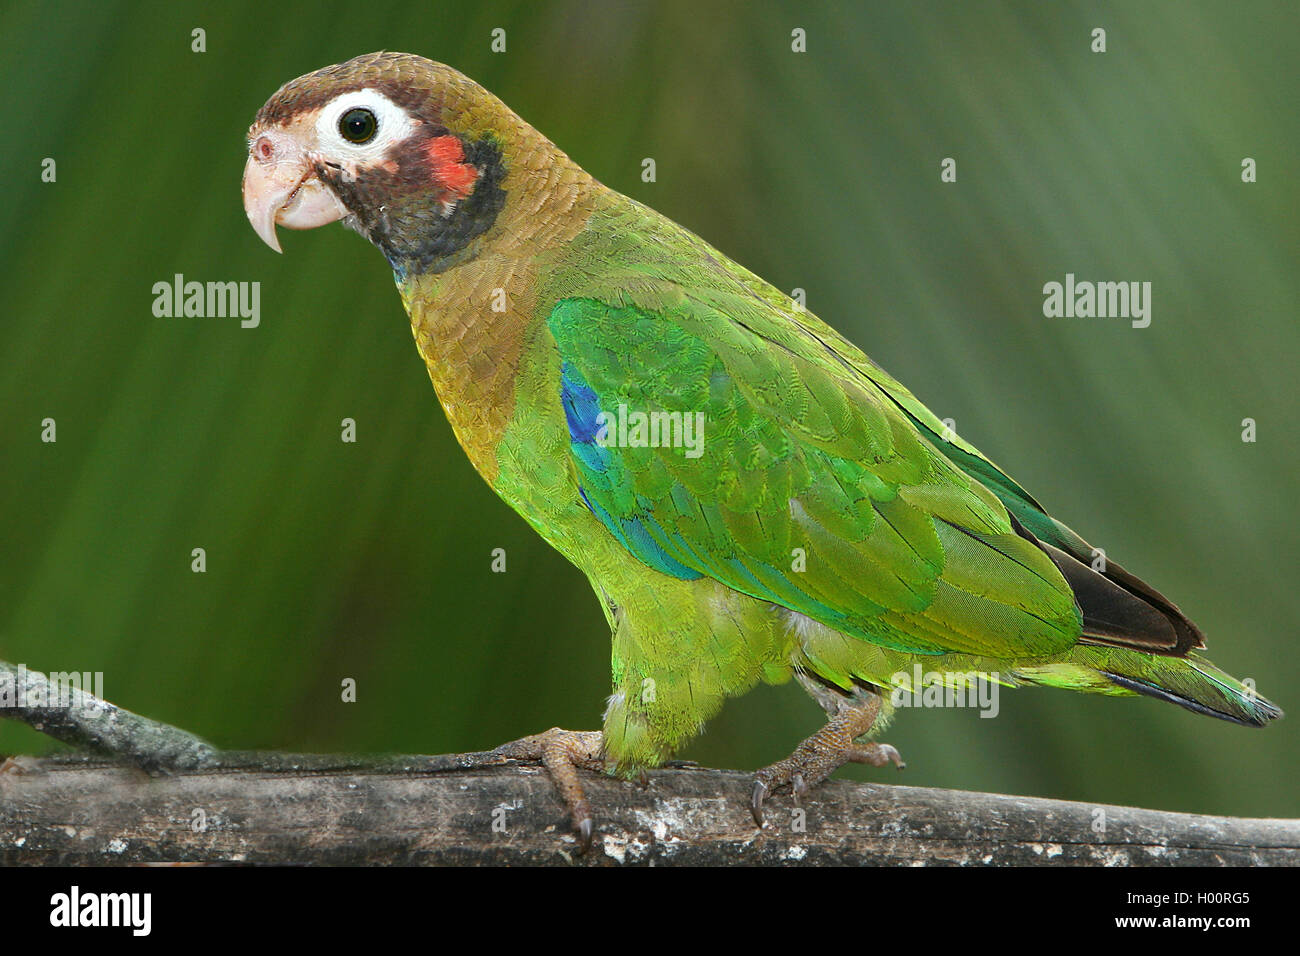 Brown-hooded Parrot (Pionopsitta haematotis), sits on a branch, Costa Rica Stock Photo